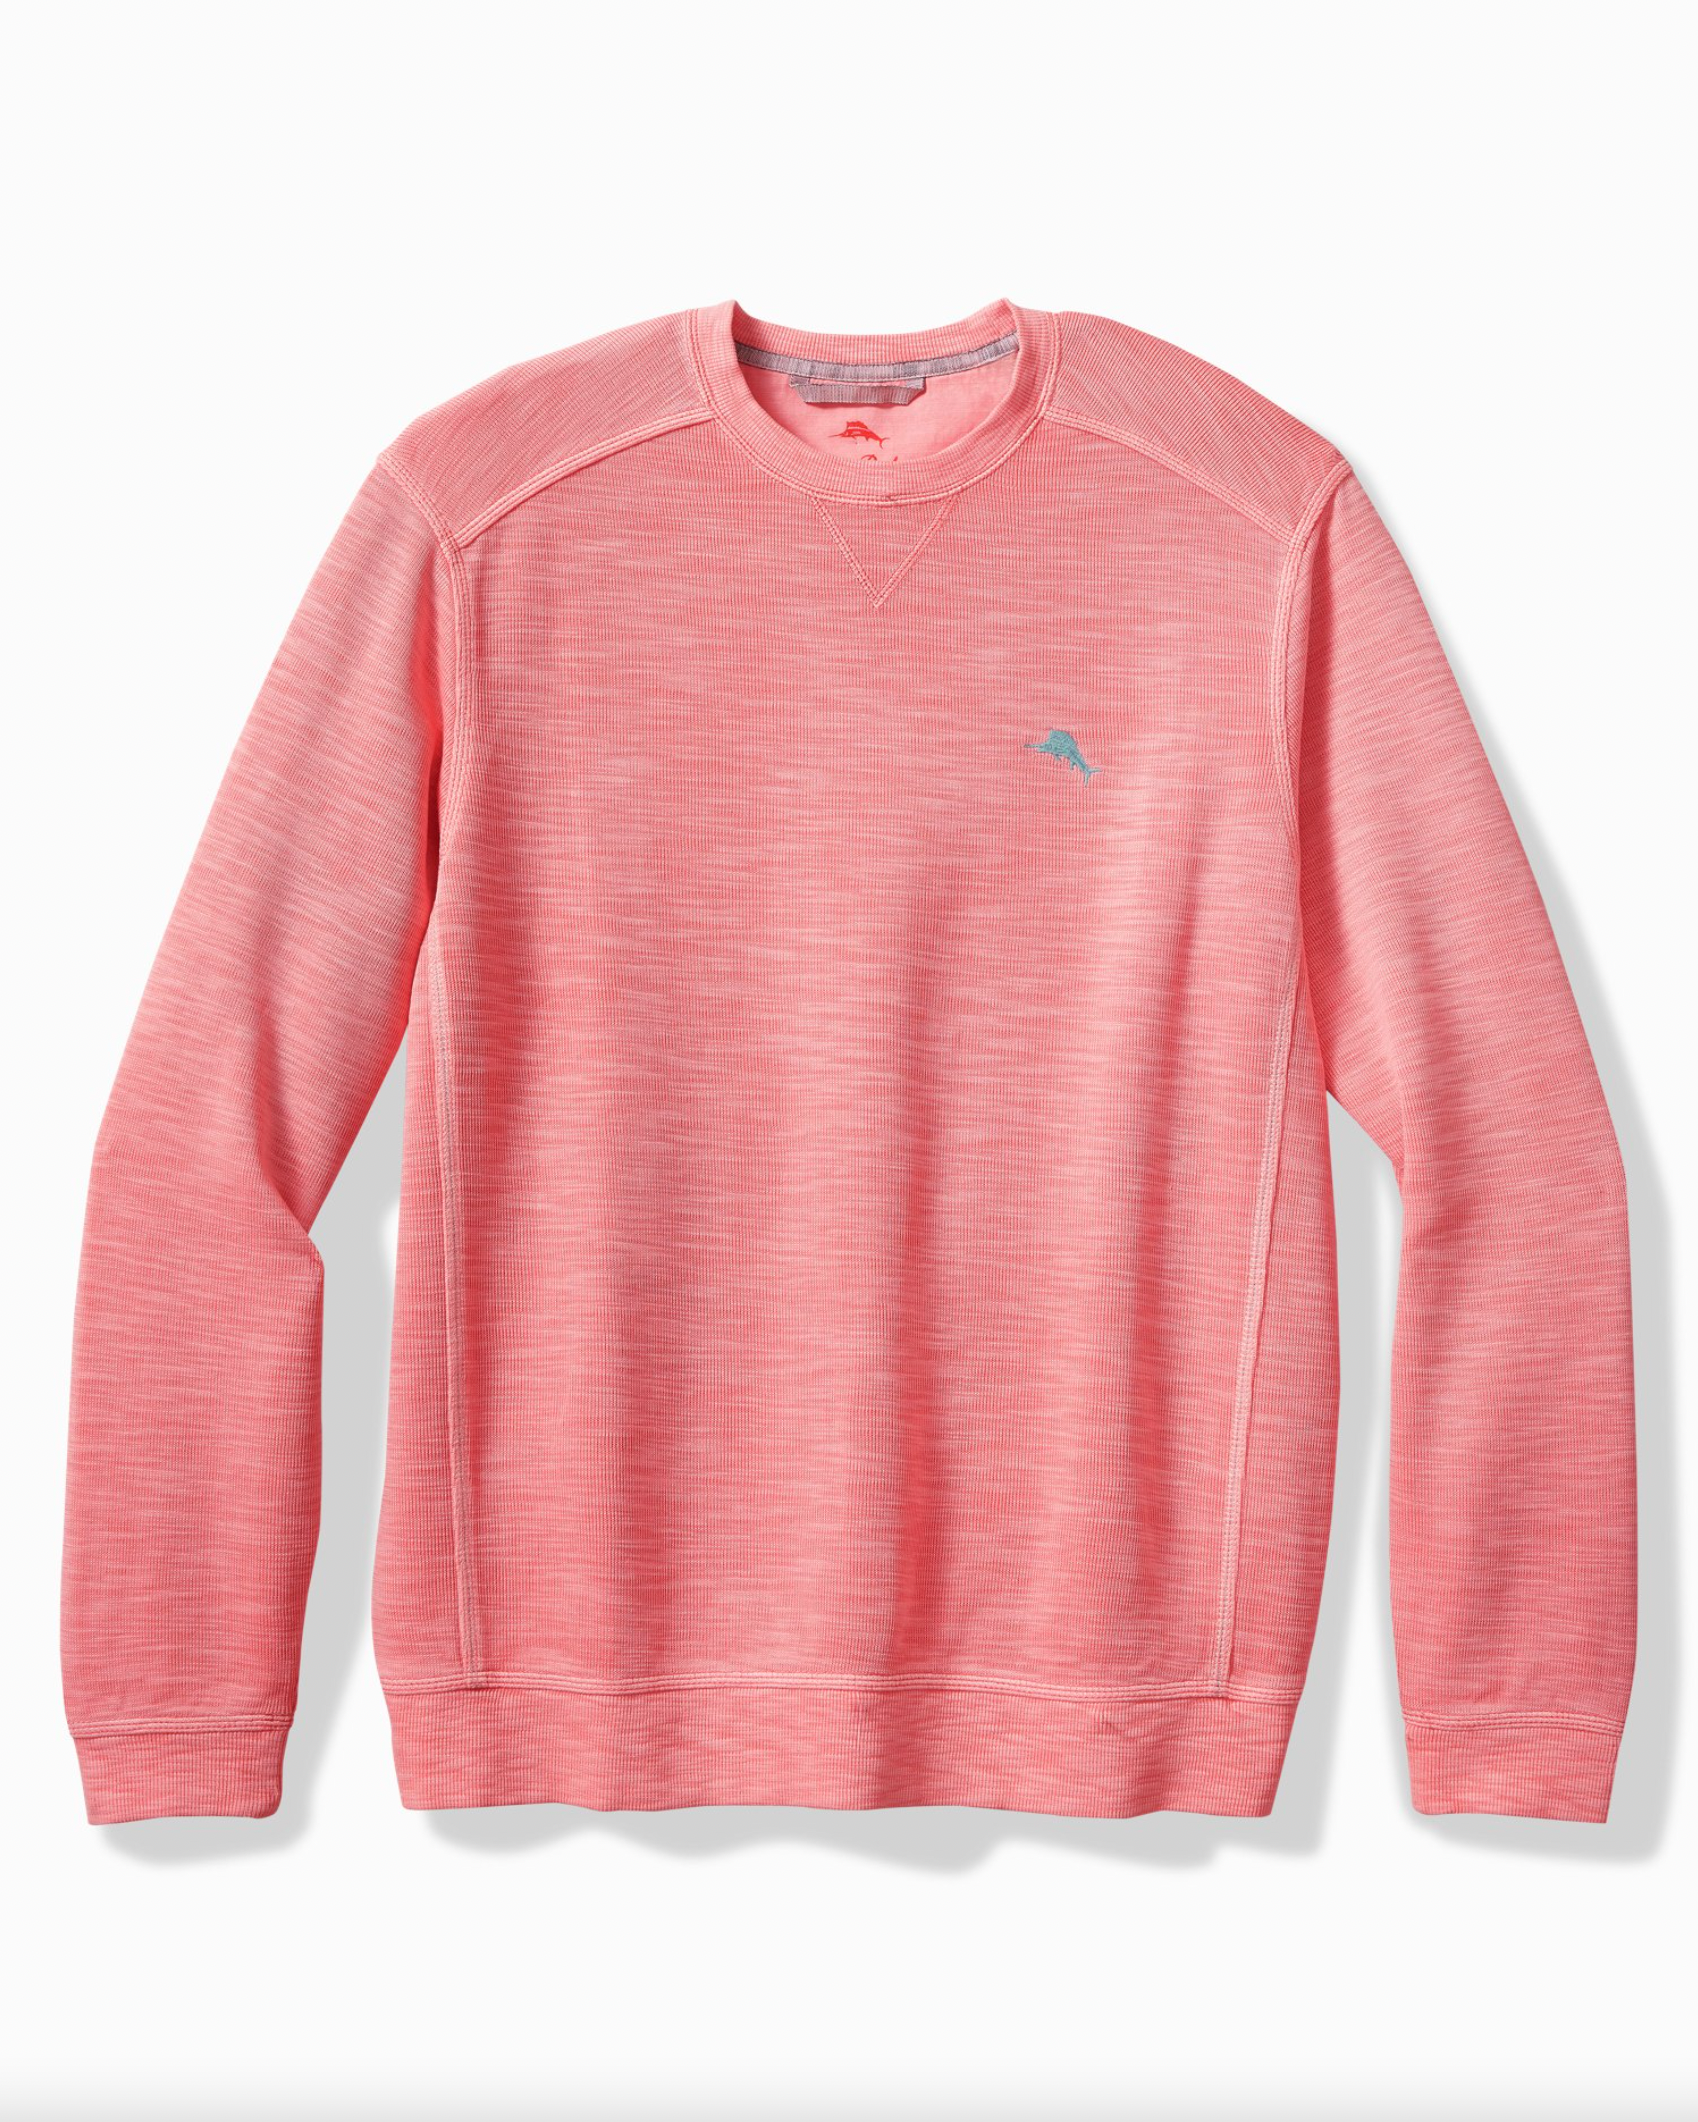 The ultra-sleek, ultra-comfortable cotton-blend sweatshirt of your dreams has arrived! Say hello to the Tobago Bay Crewneck: its first class style, comfort, and breadth of colours makes it the ultimate layering piece that can go just about anywhere.